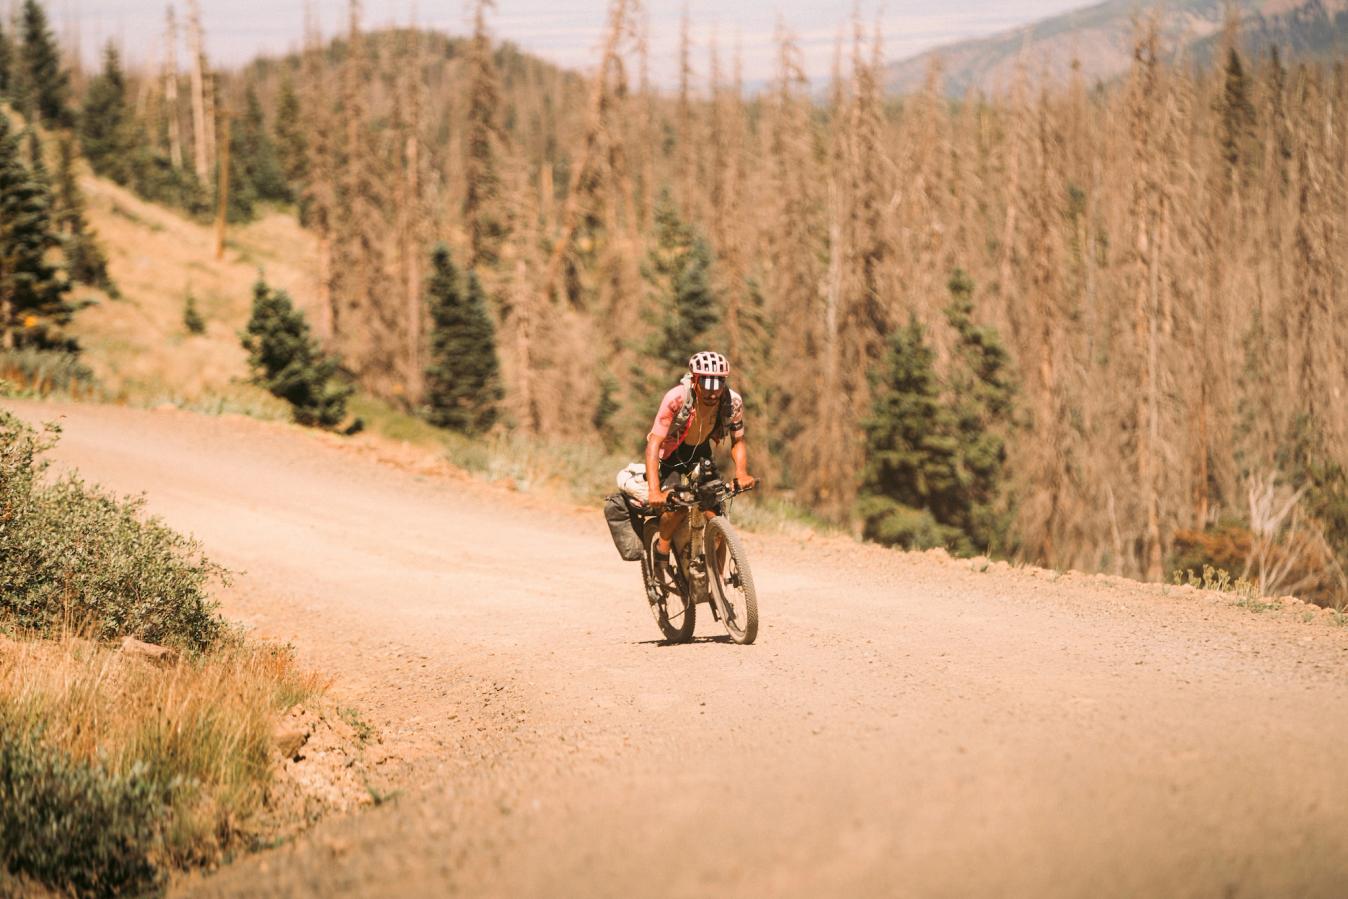 Lachlan Morton's ride will be documented in a film by Thereabouts